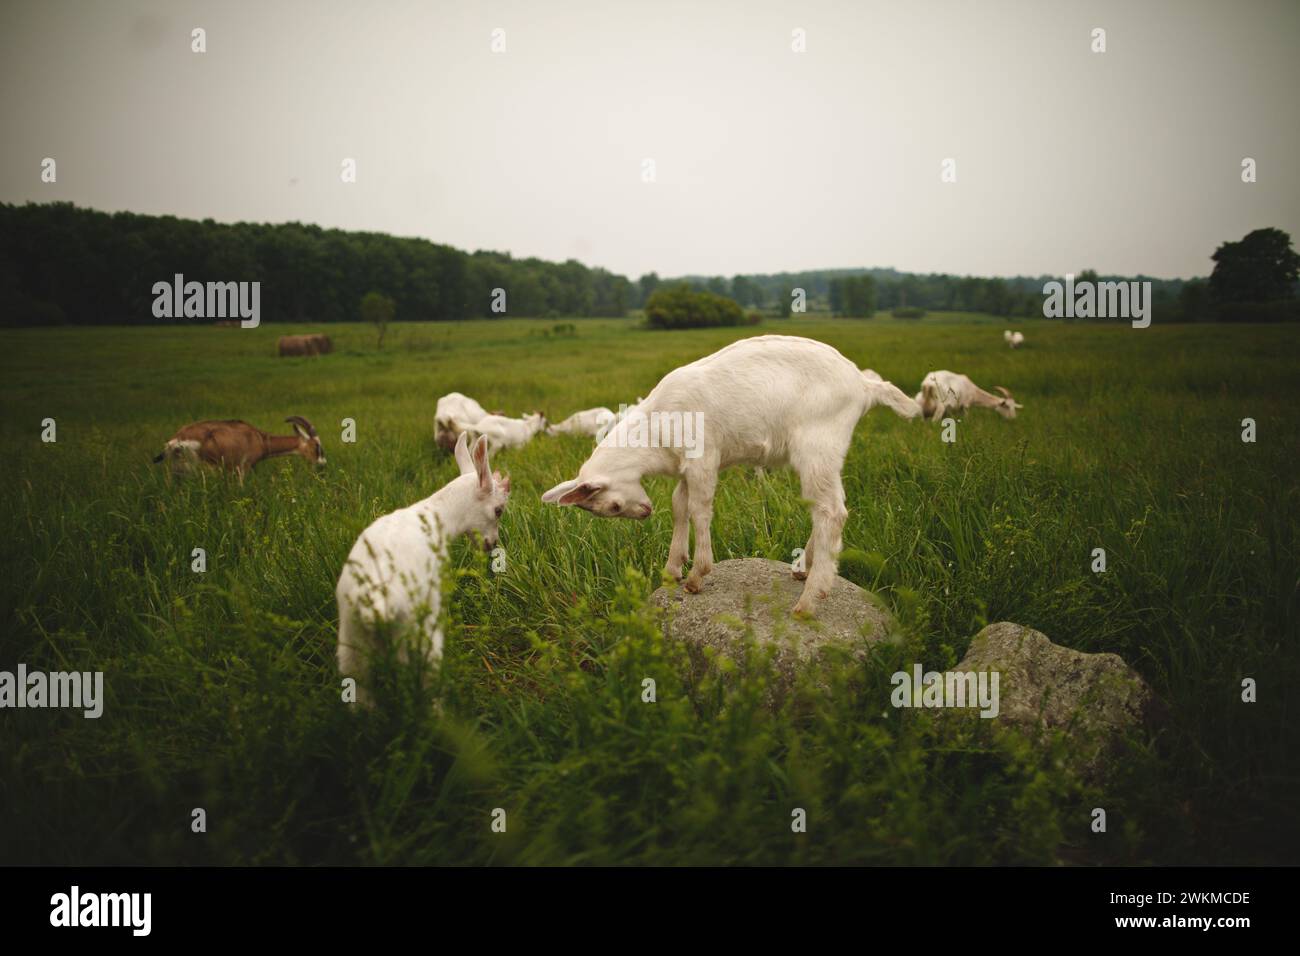 Two young goats feeding on grass in rocky field Stock Photo